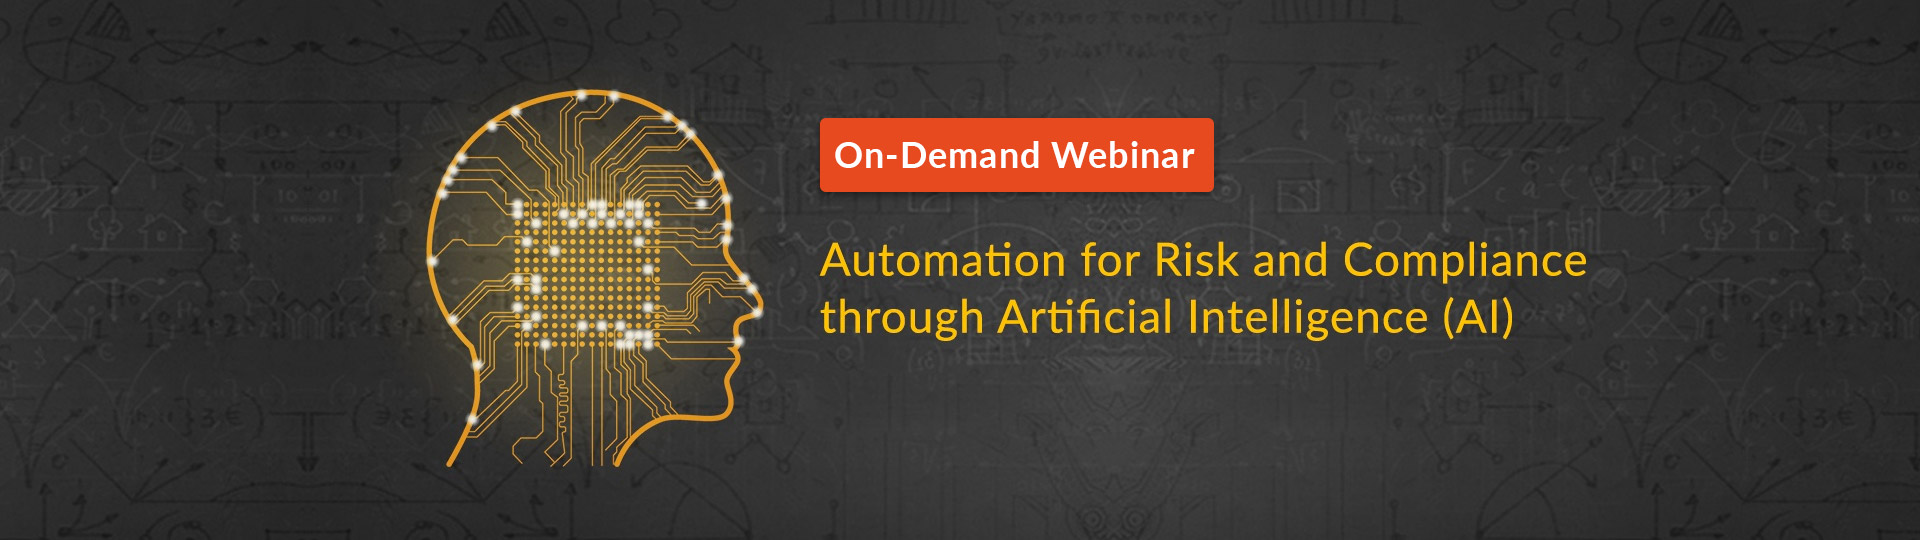 Webinar-Automation-for-Risk using AI